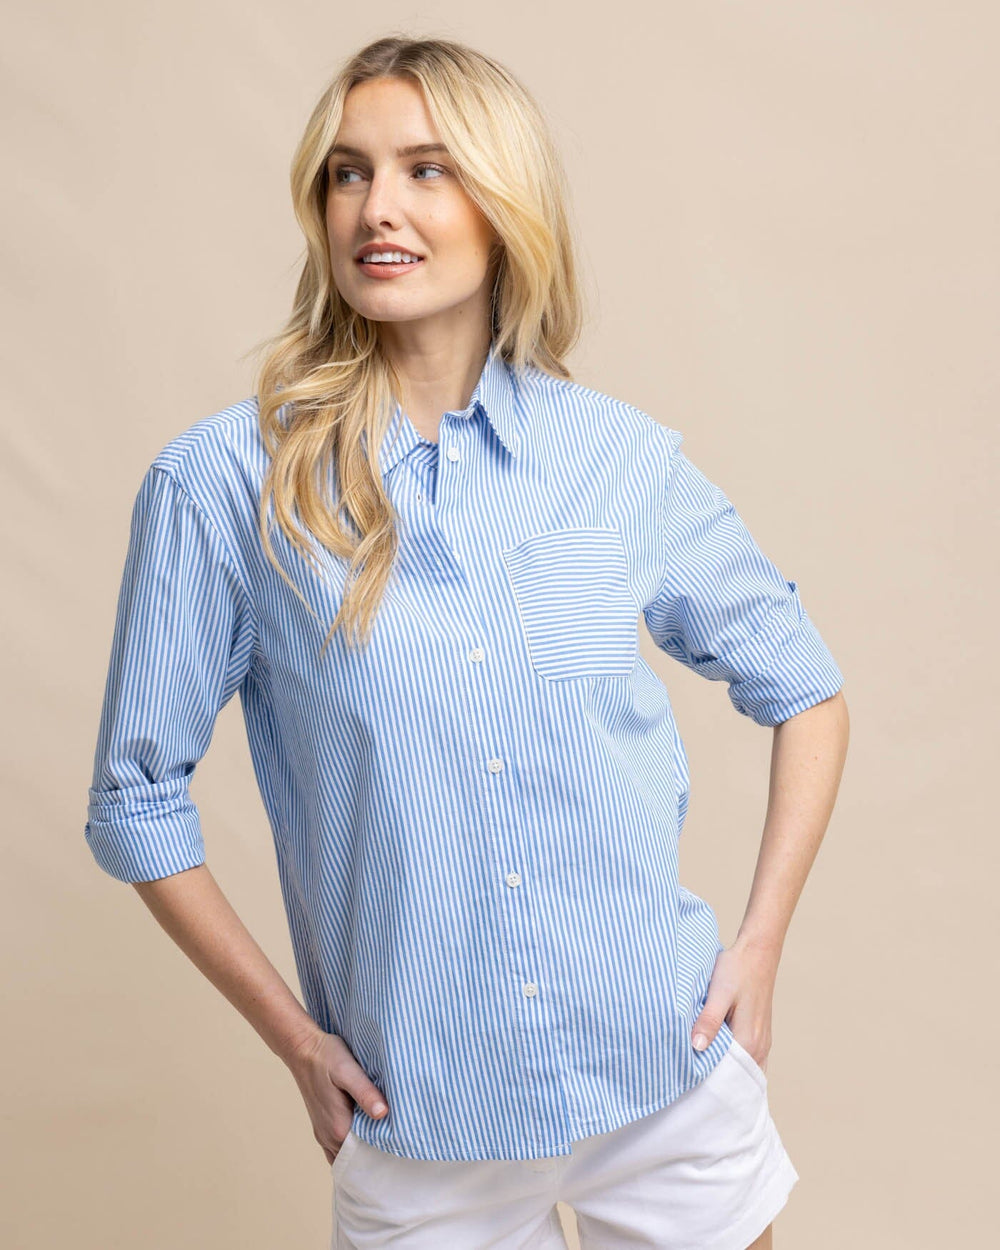 The front view of the Southern Tide Katherine Stripe Shirt by Southern Tide - Blue Fin